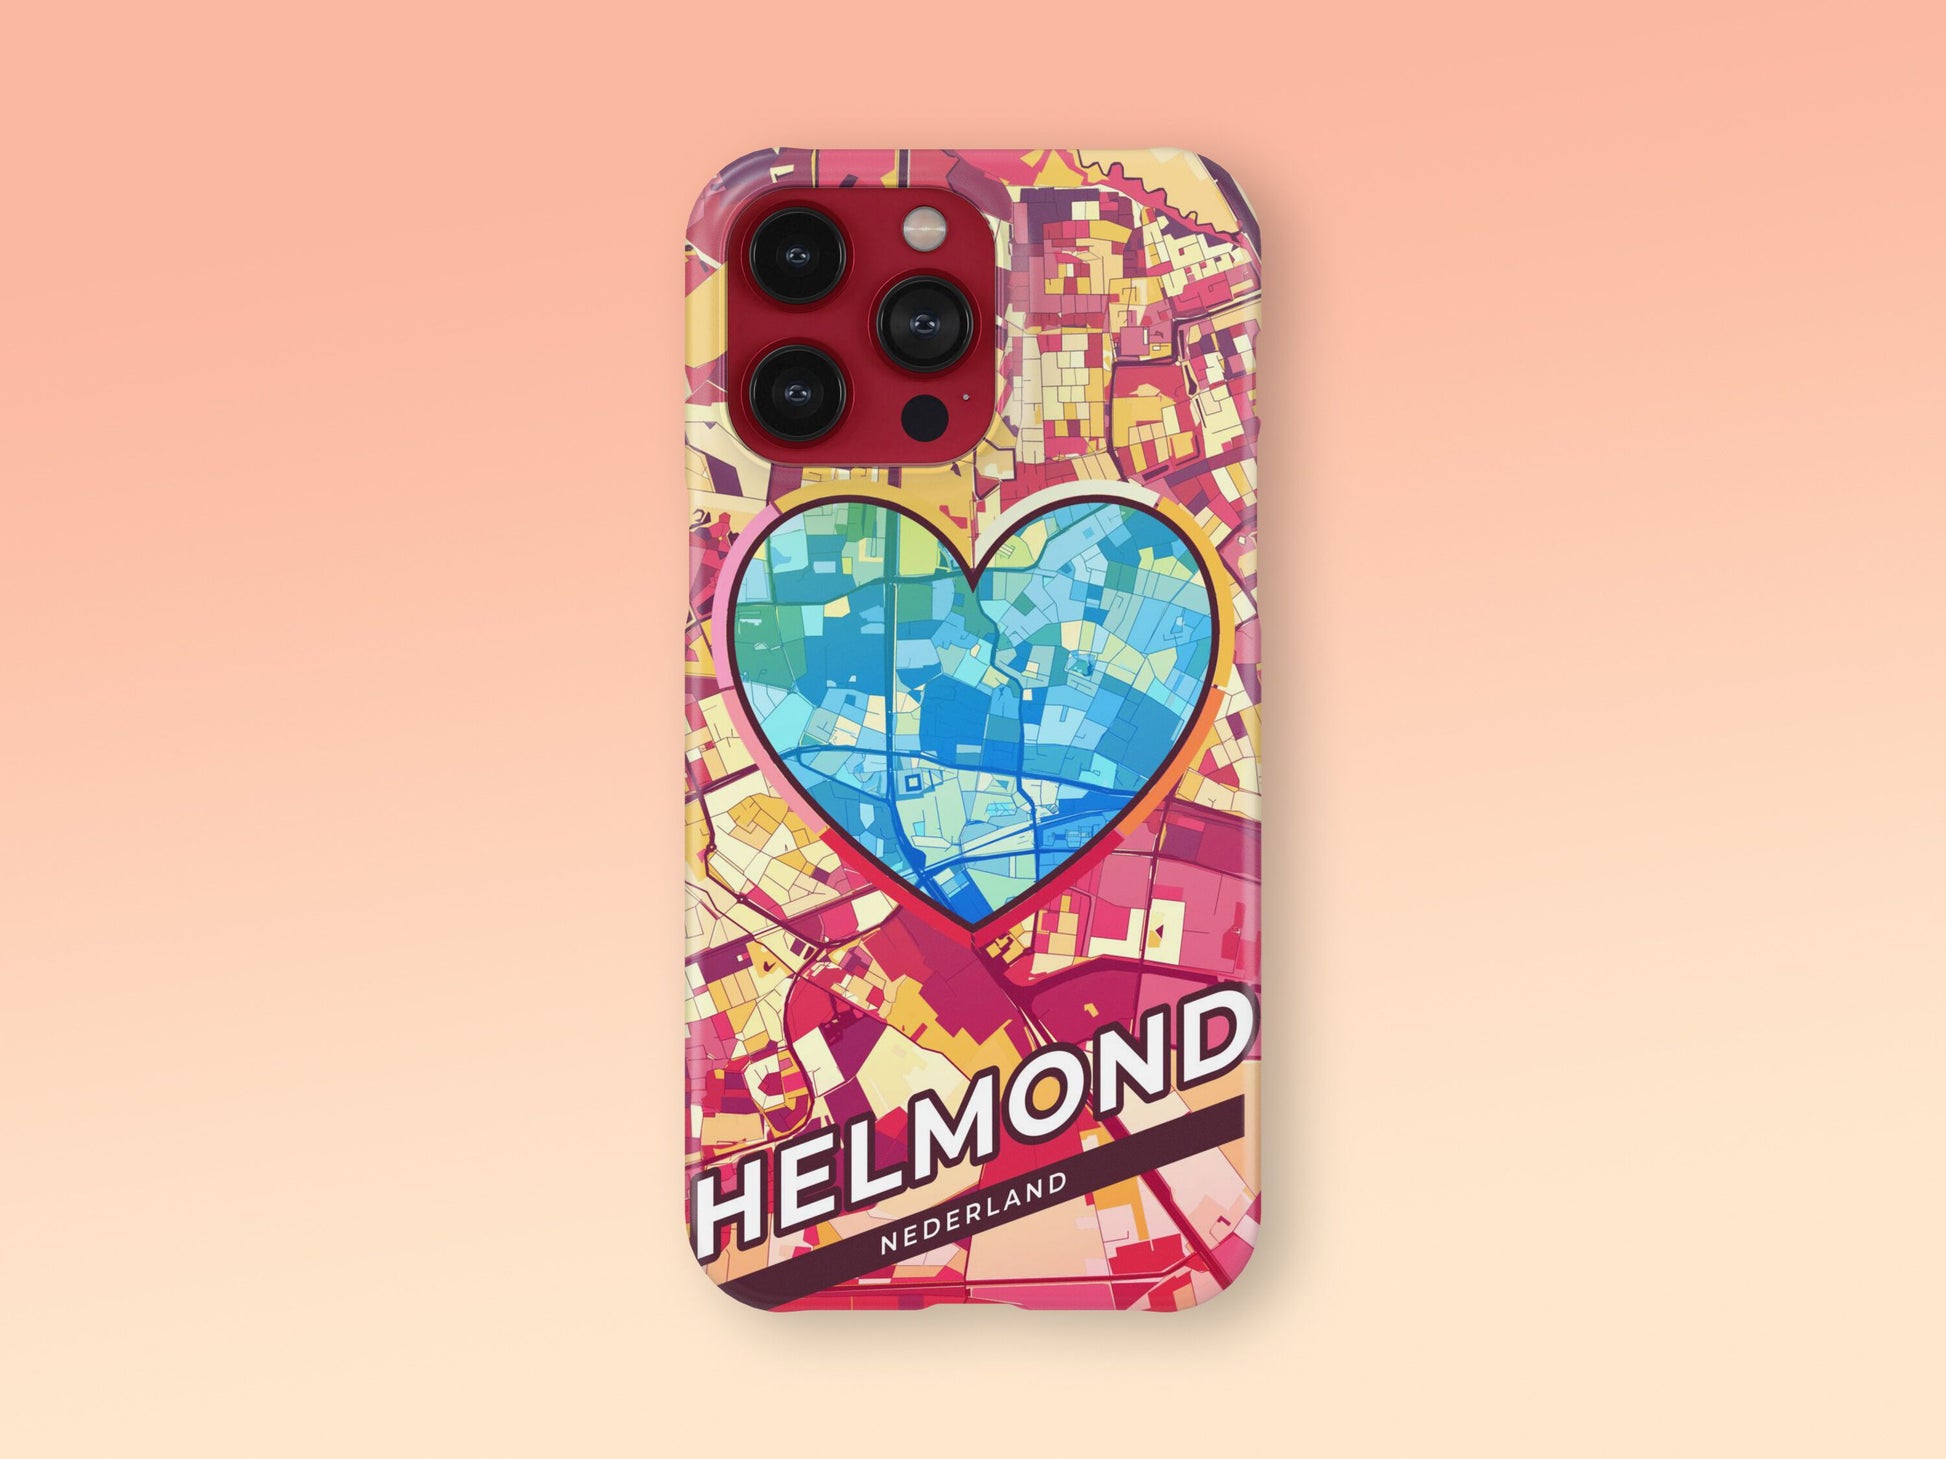 Helmond Netherlands slim phone case with colorful icon. Birthday, wedding or housewarming gift. Couple match cases. 2